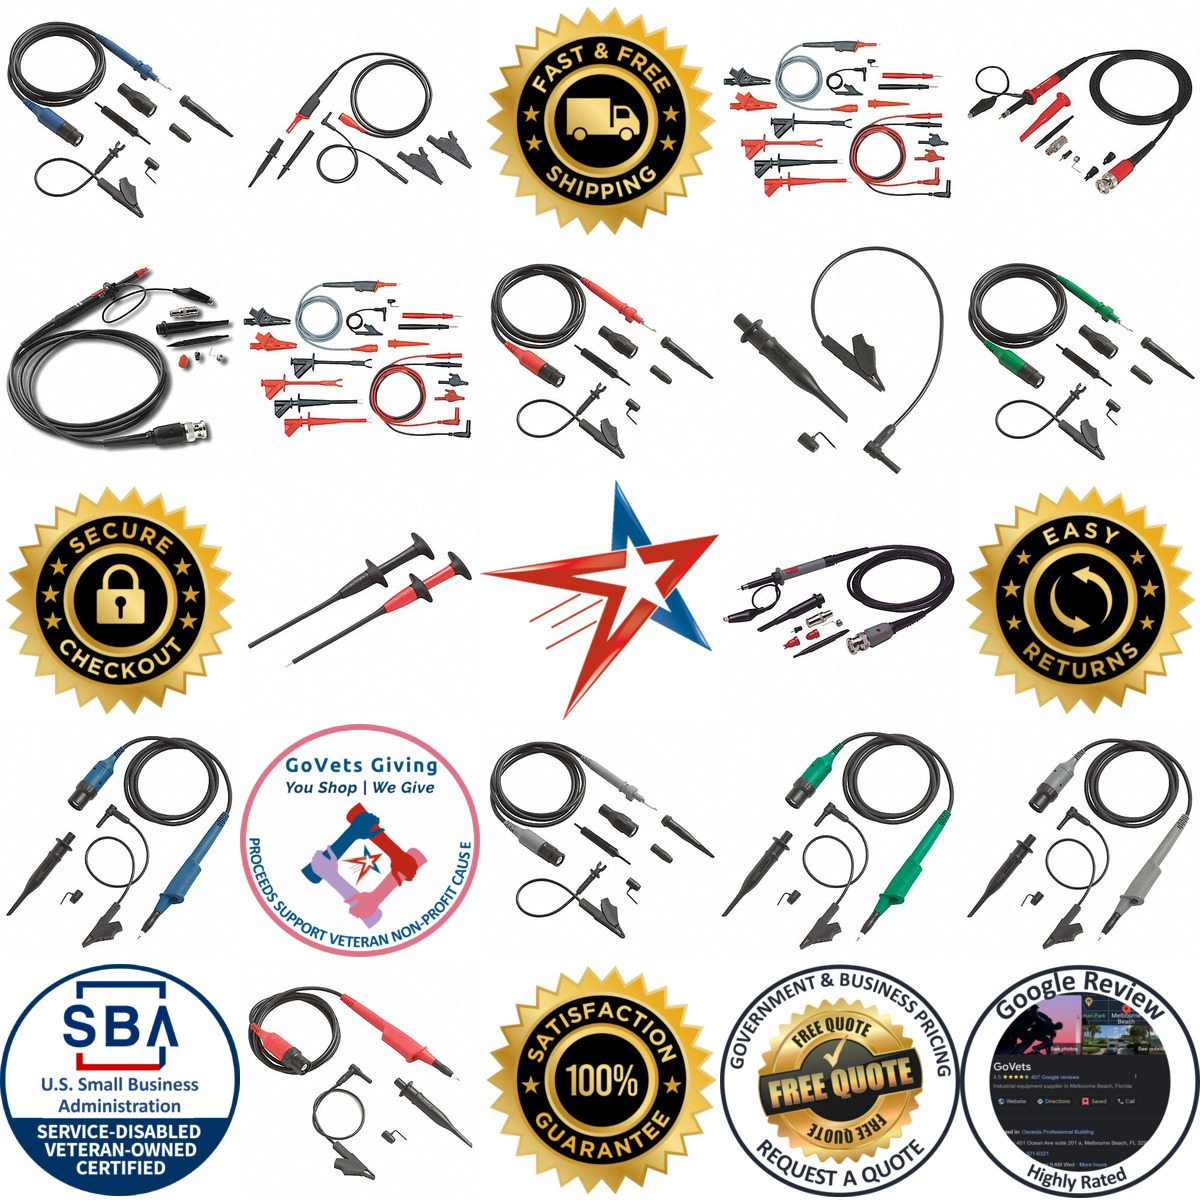 A selection of Oscilloscope Probes products on GoVets